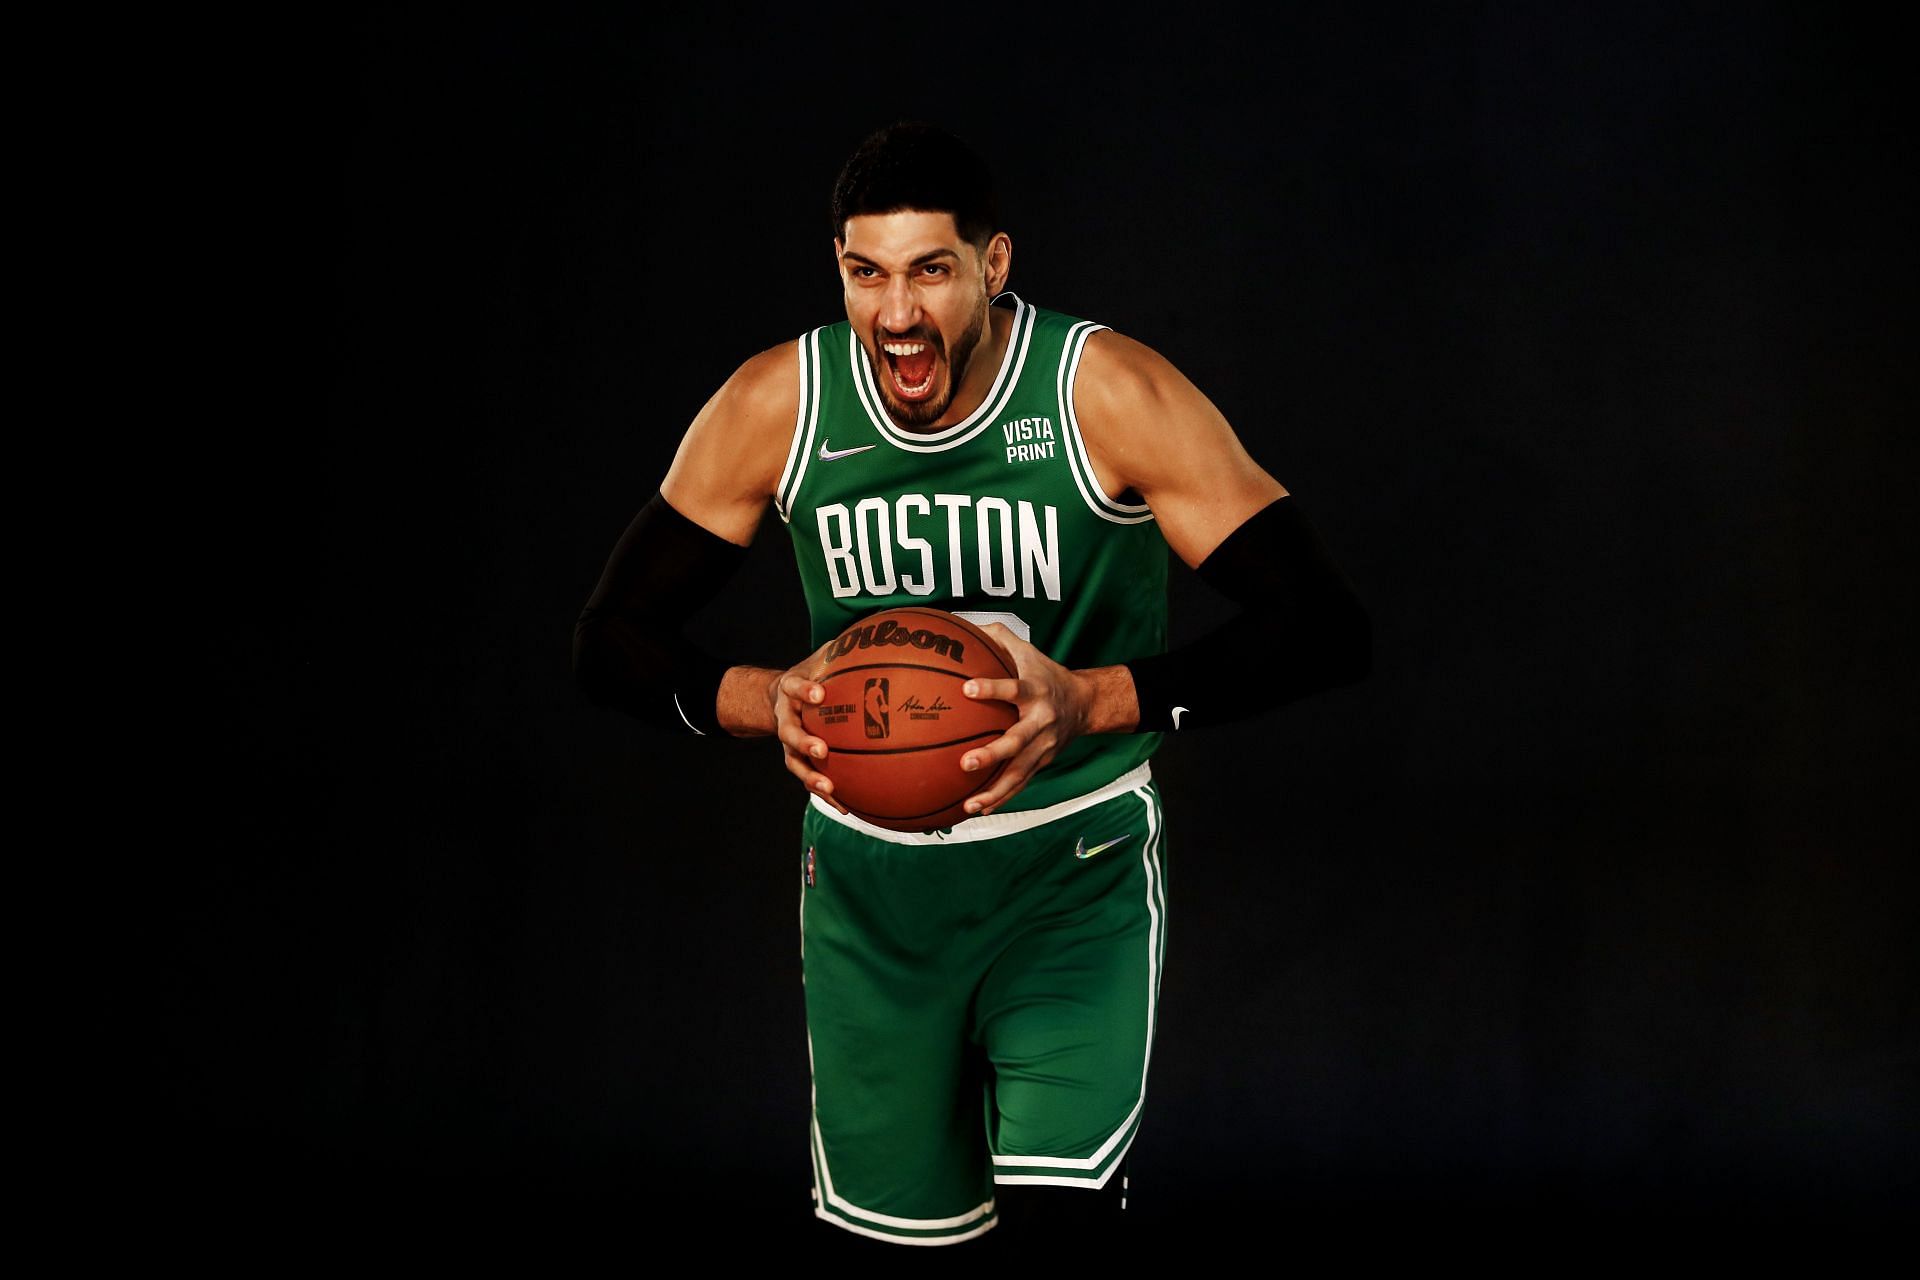 Enes Kanter #13 of the Boston Celtics poses for a photo during Media Day at High Output Studios on September 27, 2021 in Canton, Massachusetts.